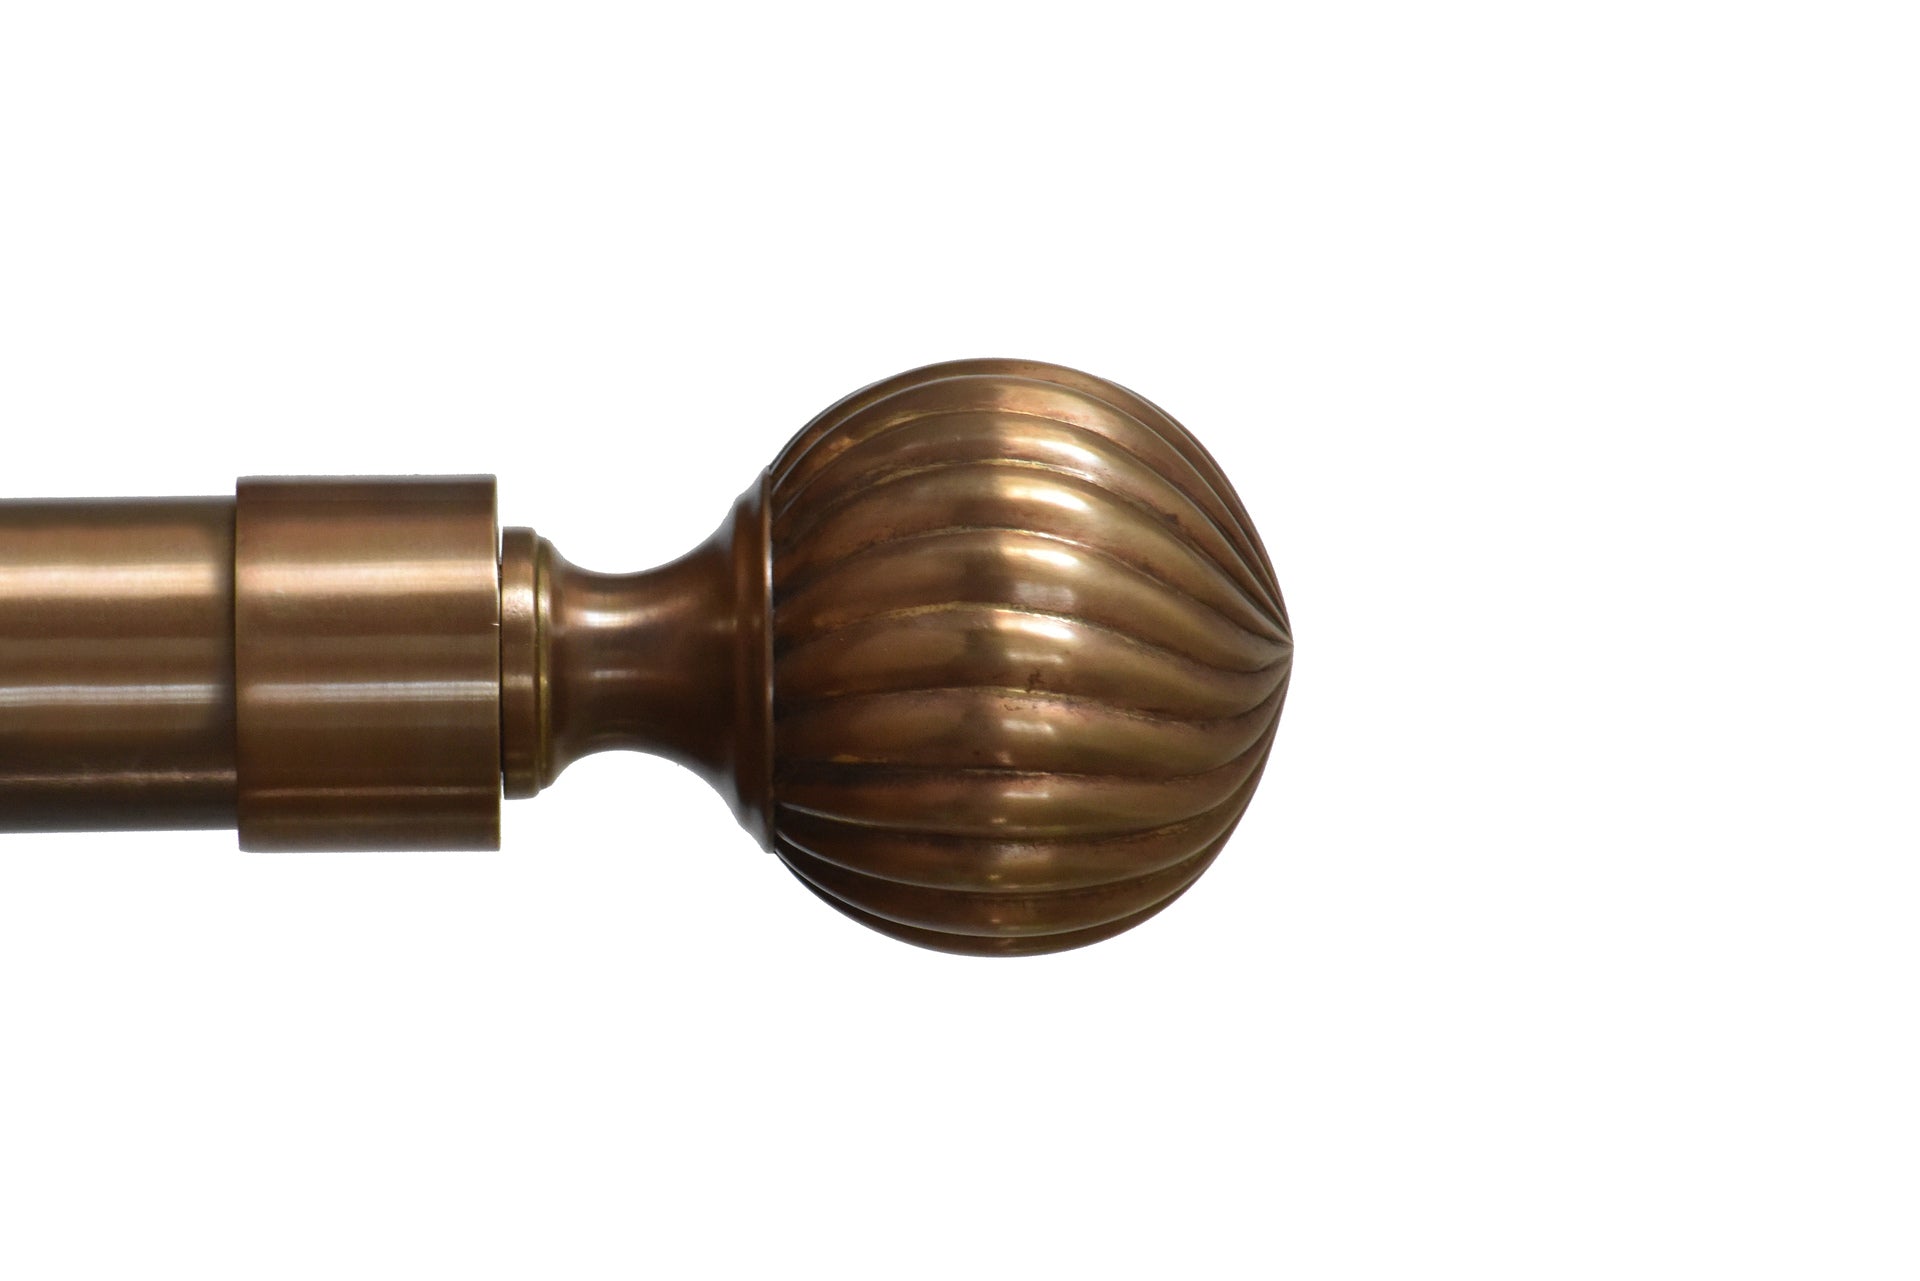 Tillys Classic Twisted Ball Finial Curtain Pole Set in Antique Brass